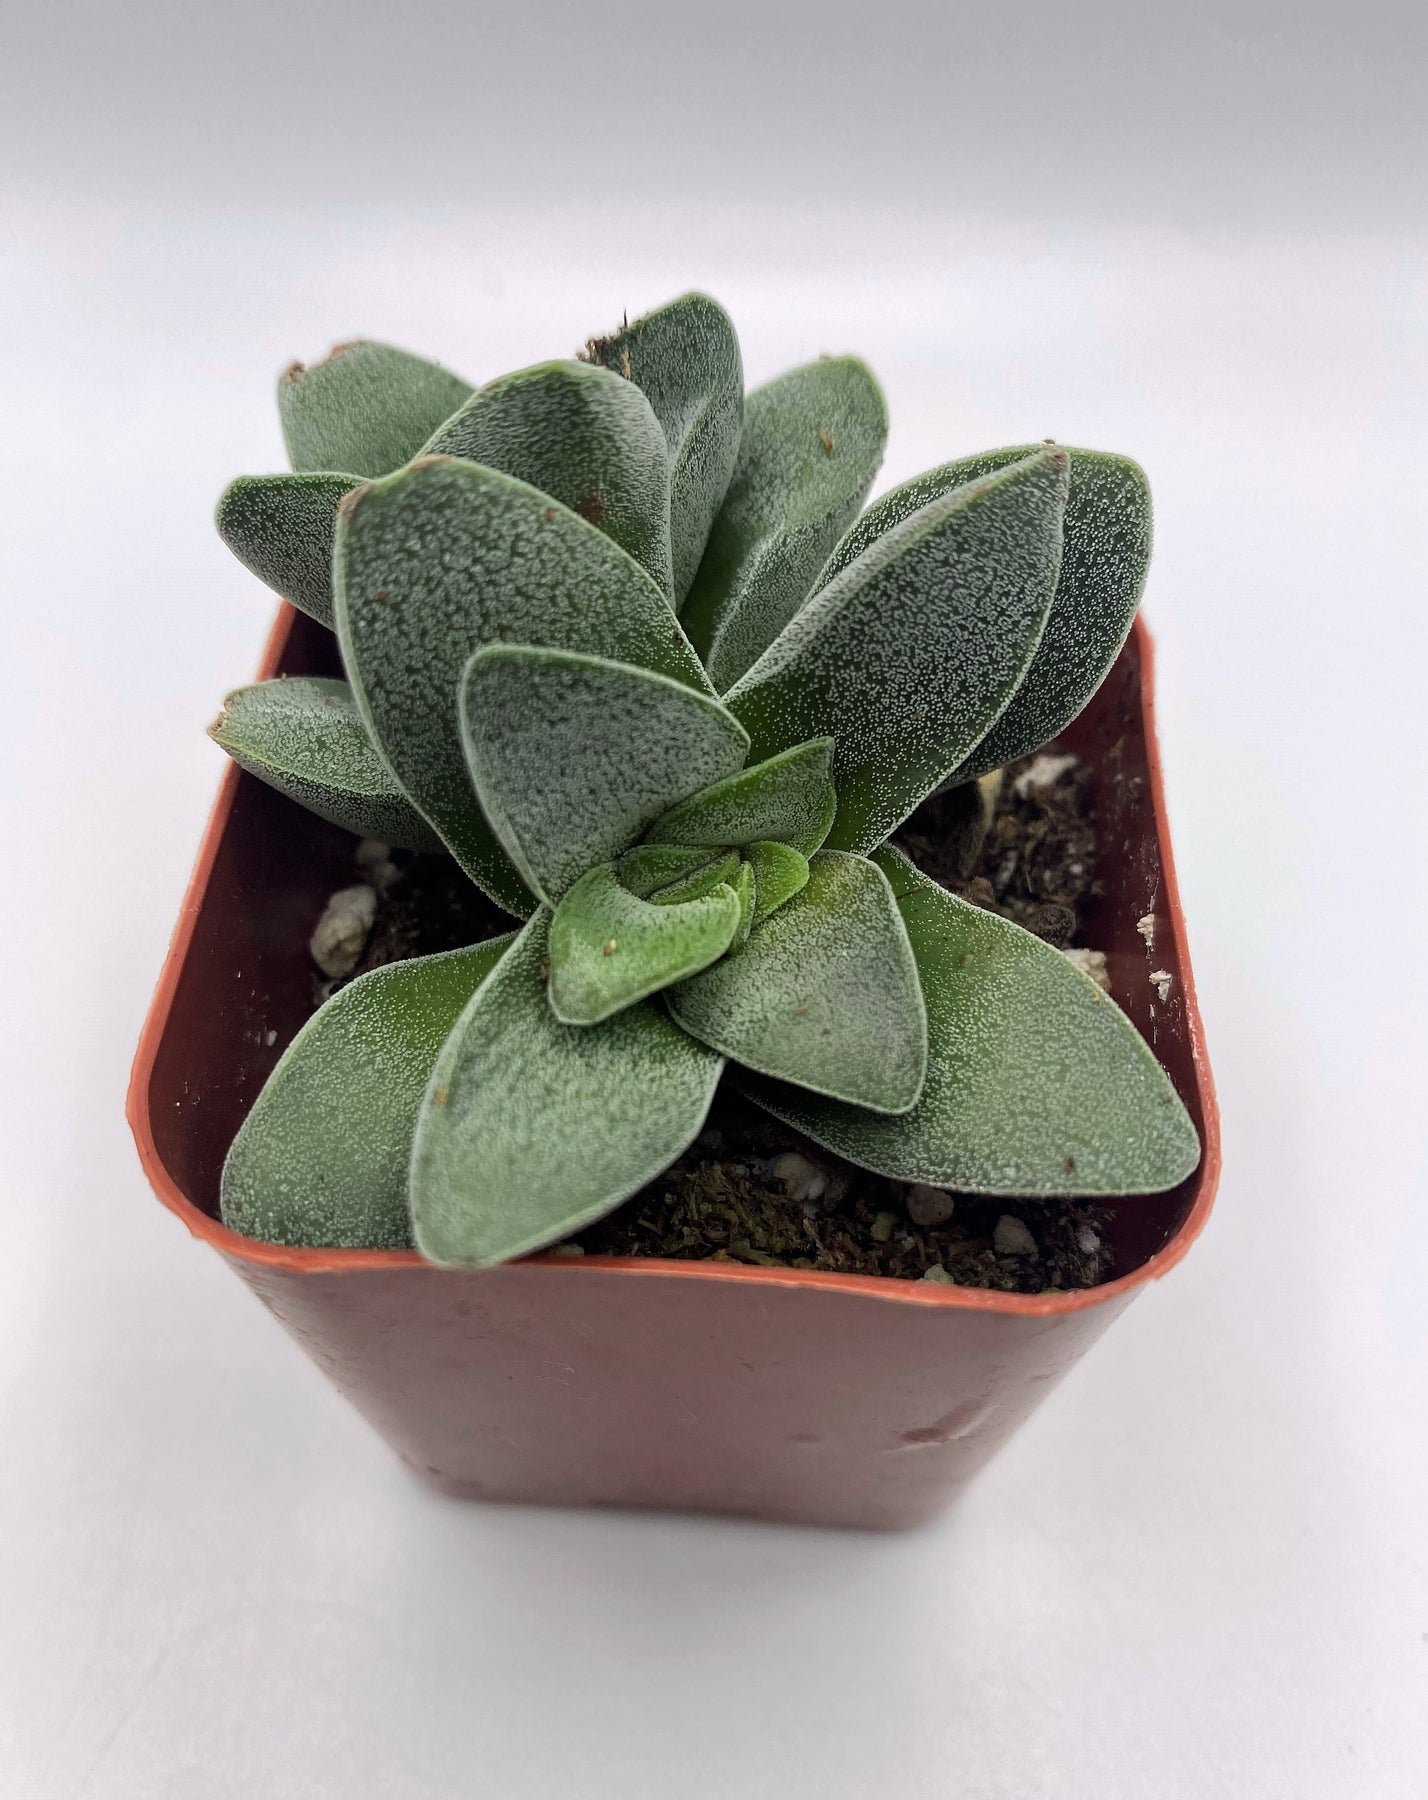 #9 Crassula Morgan's Beauty-Succulent - Small - Exact 2in Type-The Succulent Source